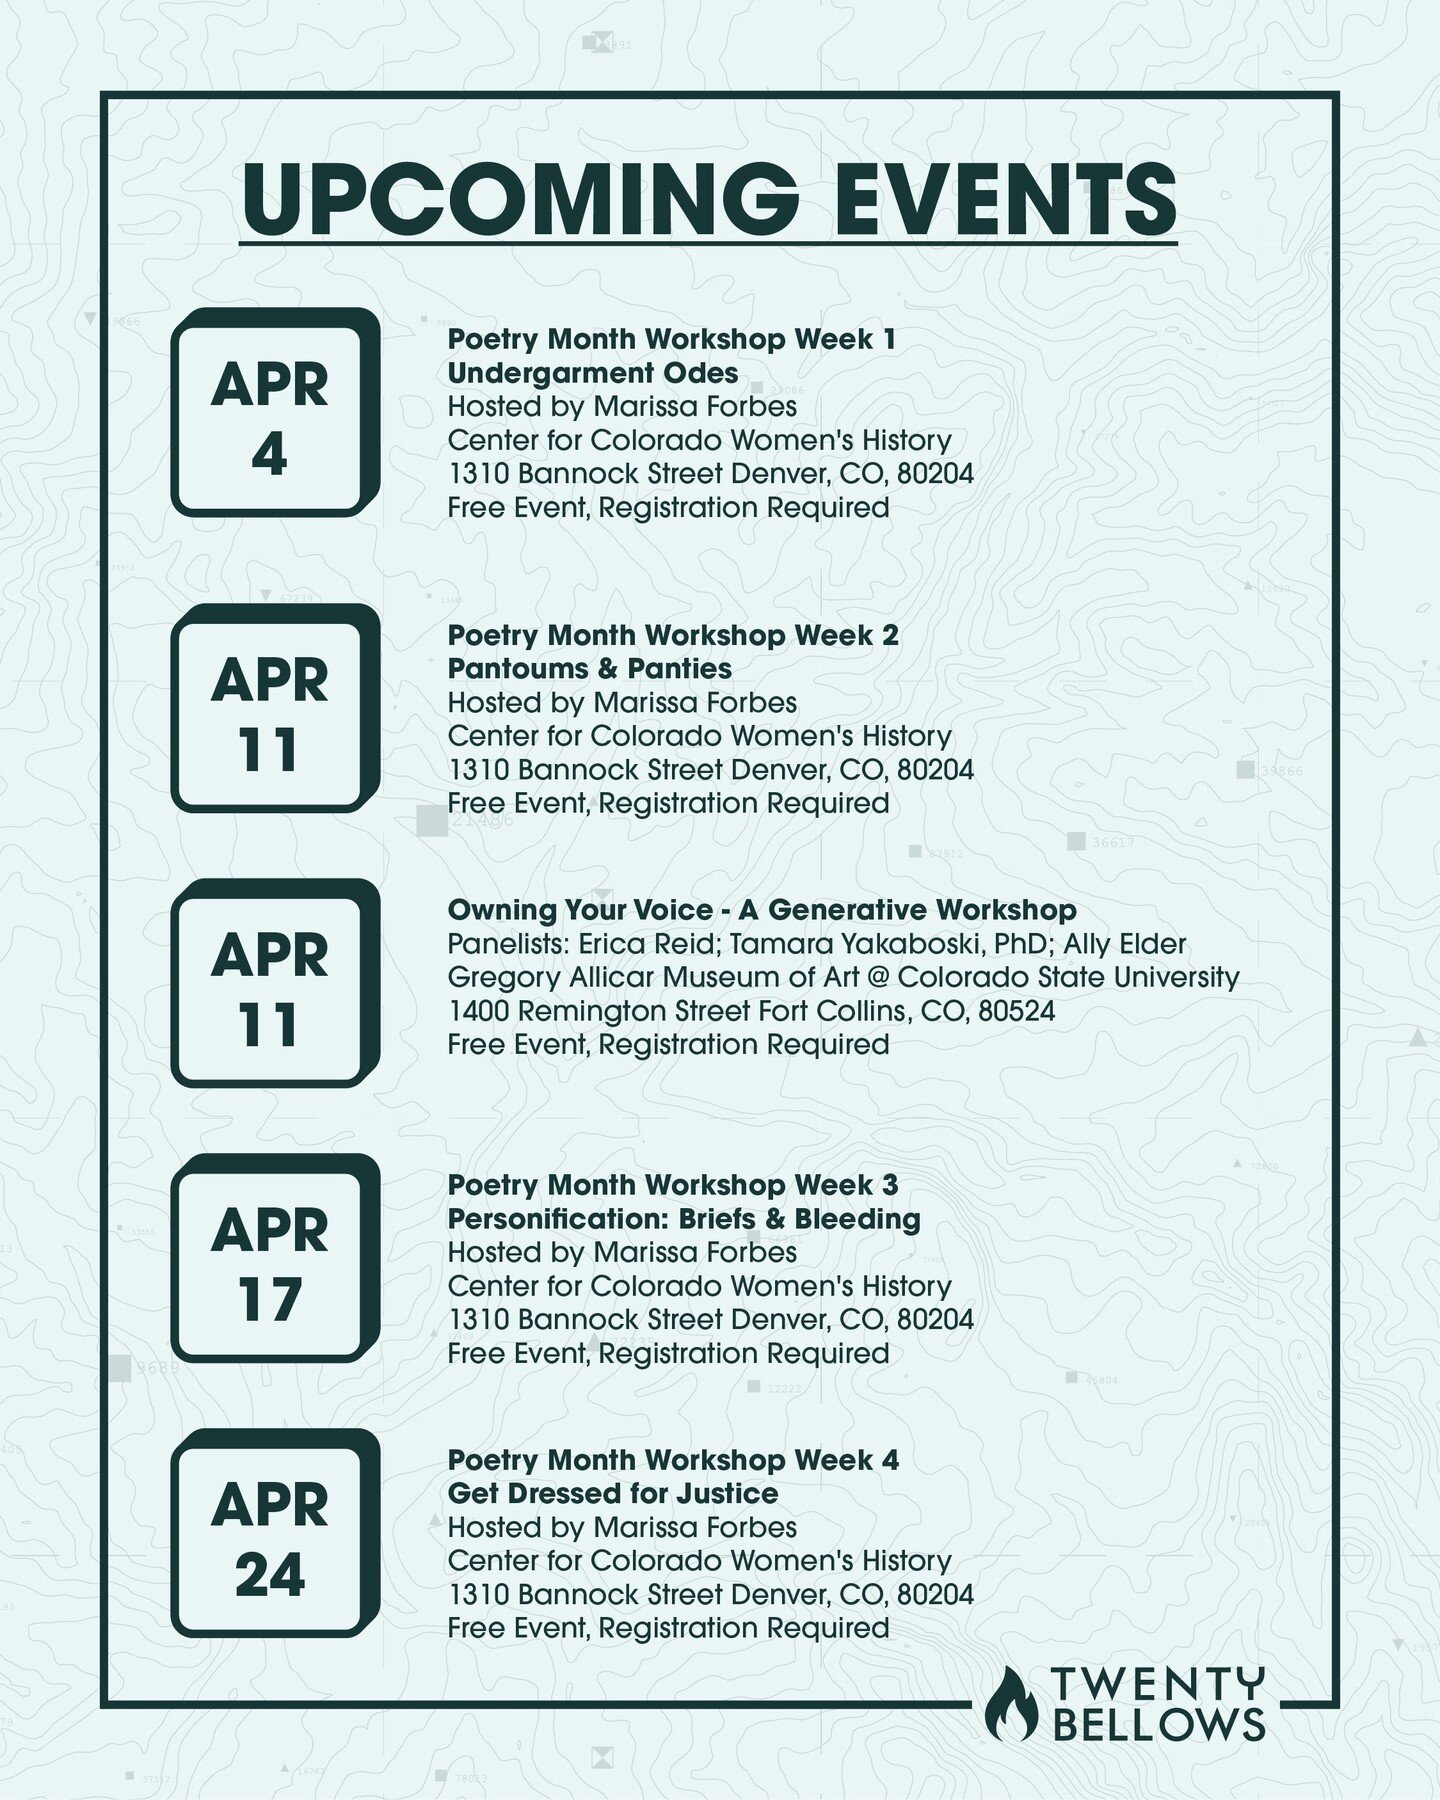 No fooling! We have a TON of programming for you all this month, and we can't wait to dig in. Take a look at just some of the live events we have planned this month, and head over to twentybellowslit.com to learn more and sign-up. See you out there!